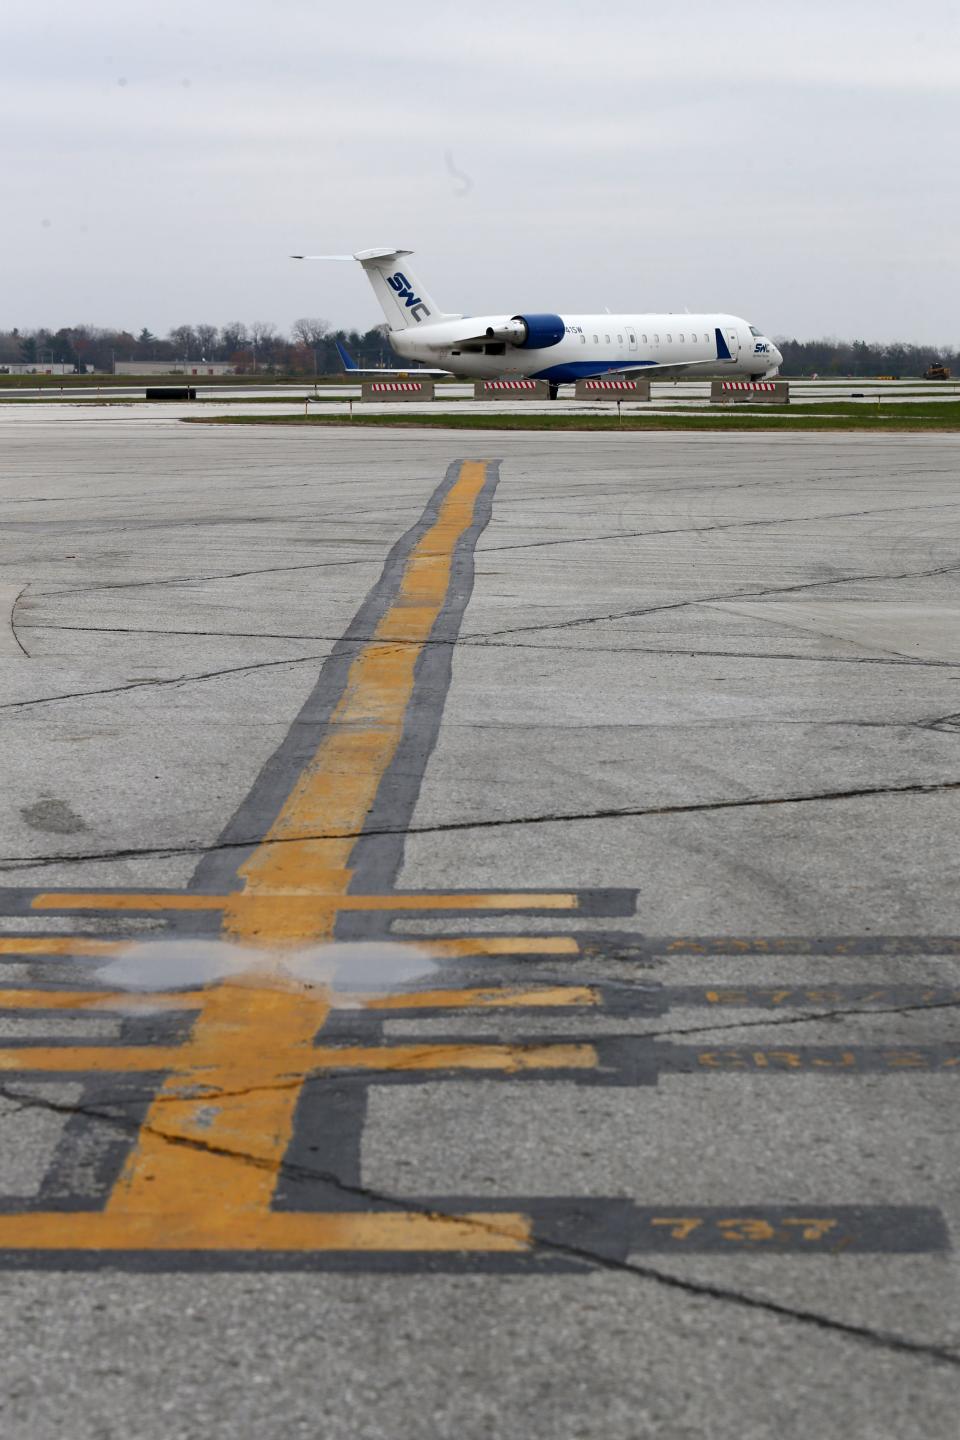 The older asphalt tarmac can see cracks during a multi-year tarmac and ramp replacement project Wednesday, Nov. 8, 2023, at the South Bend International Airport.